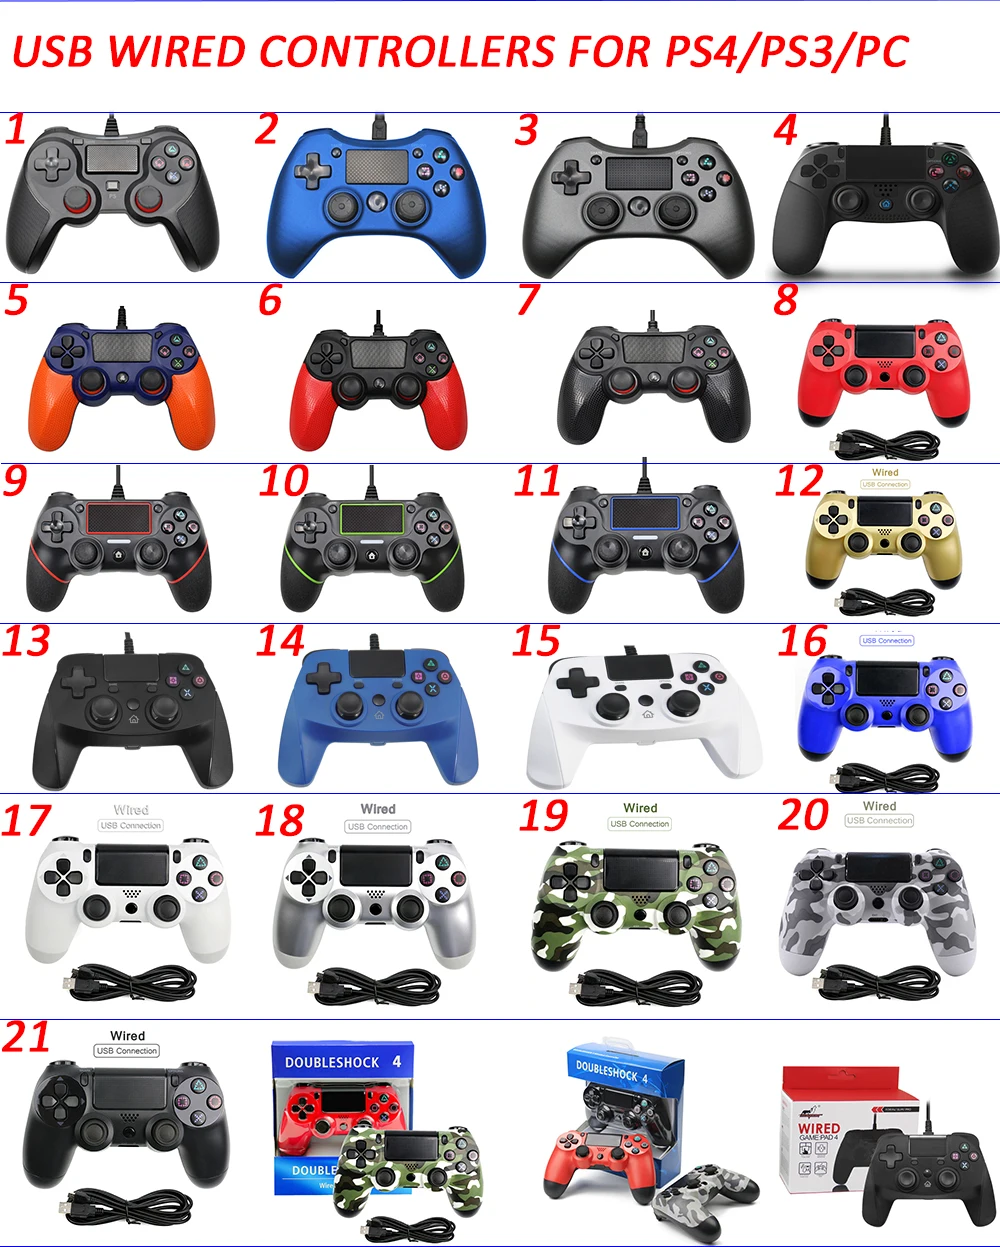 ps3 cfw rebug full ps4 controller compatibility